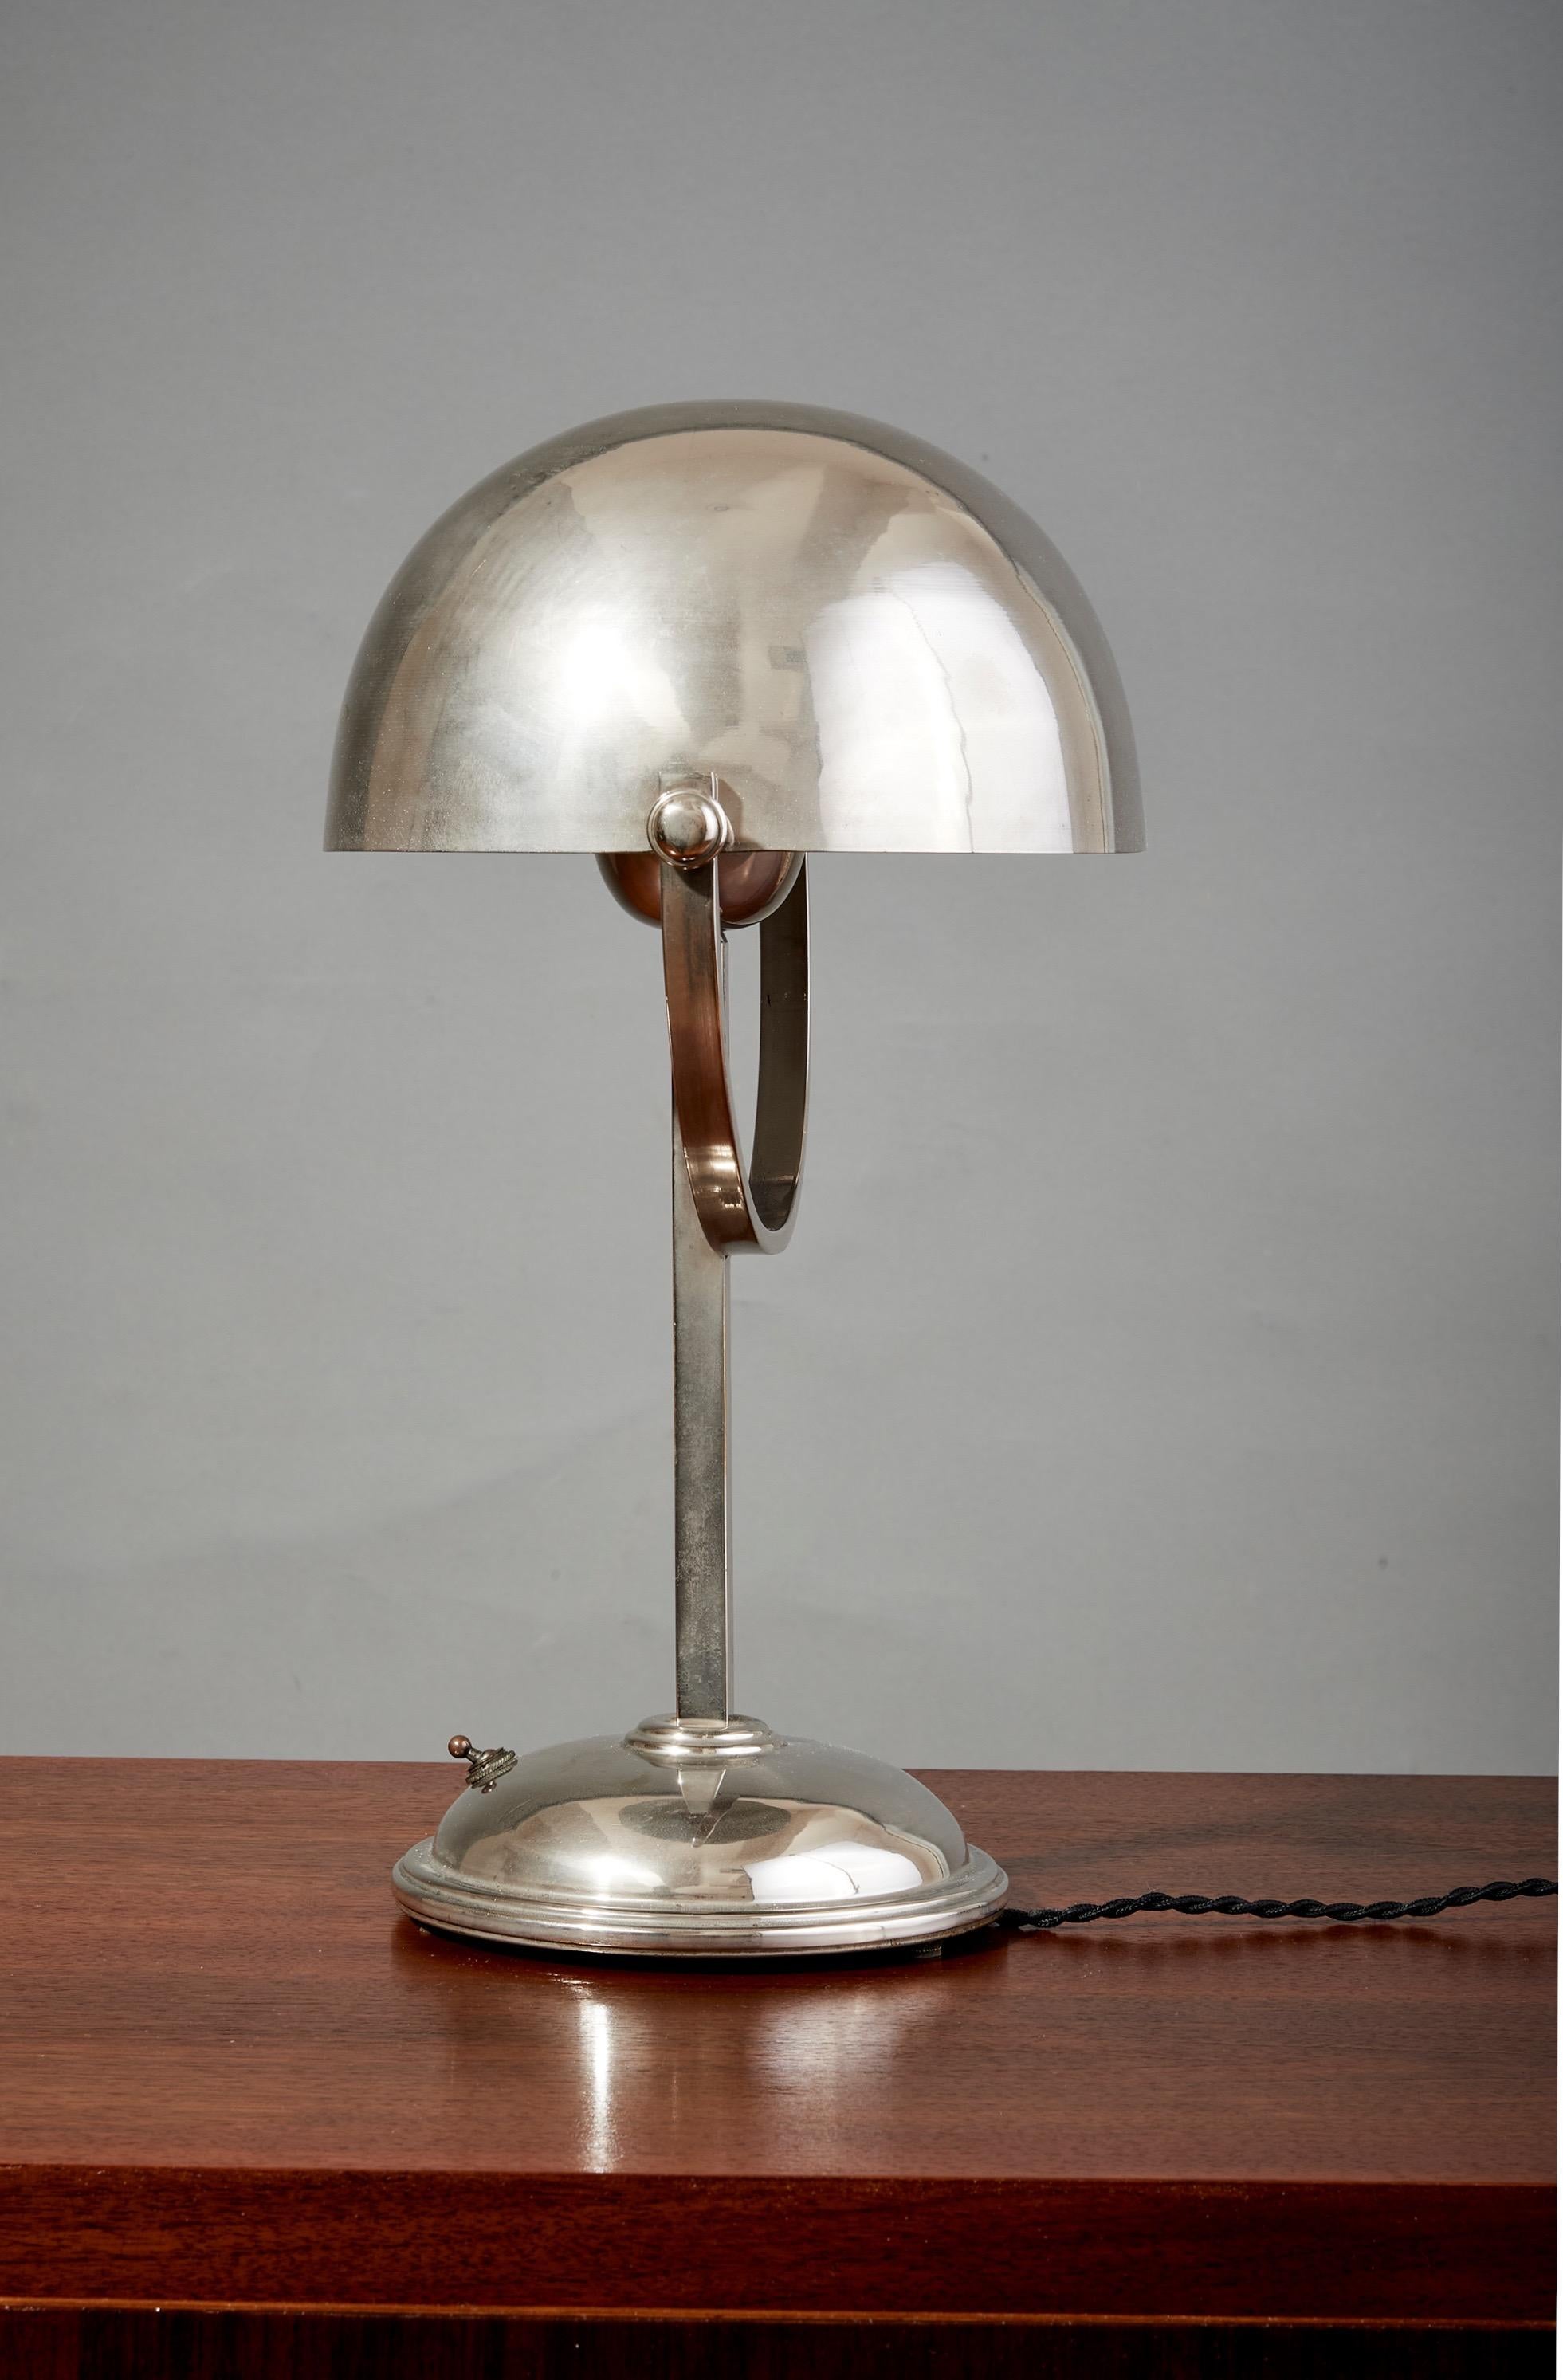 Mid-20th Century Felix Aublet Style Nickel-Plated Table Lamp with Rounded Shade, France 1930's For Sale